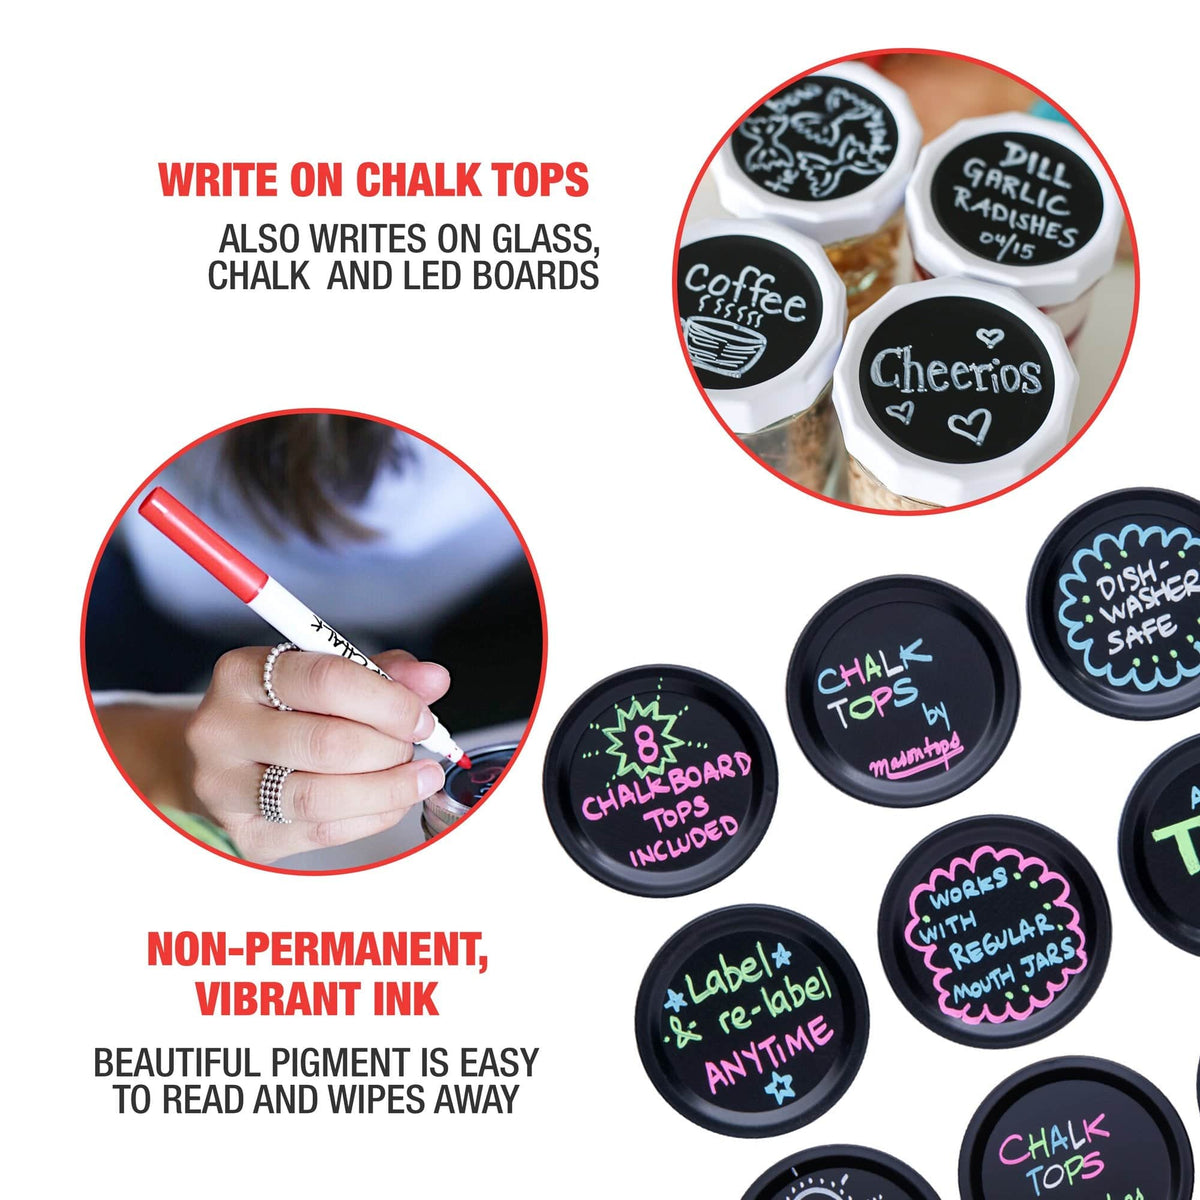 Writing on the jar lid chalk tops. Another photo is of a woman using a liquid chalk marker. There are words: &quot;Write on chalk tops, Also writes on glass, chalk and LED boards.&quot;, &quot;Non-Permanent, Vibrant Ink. Beautiful Pigment is easy to read and wipes away.&quot;.